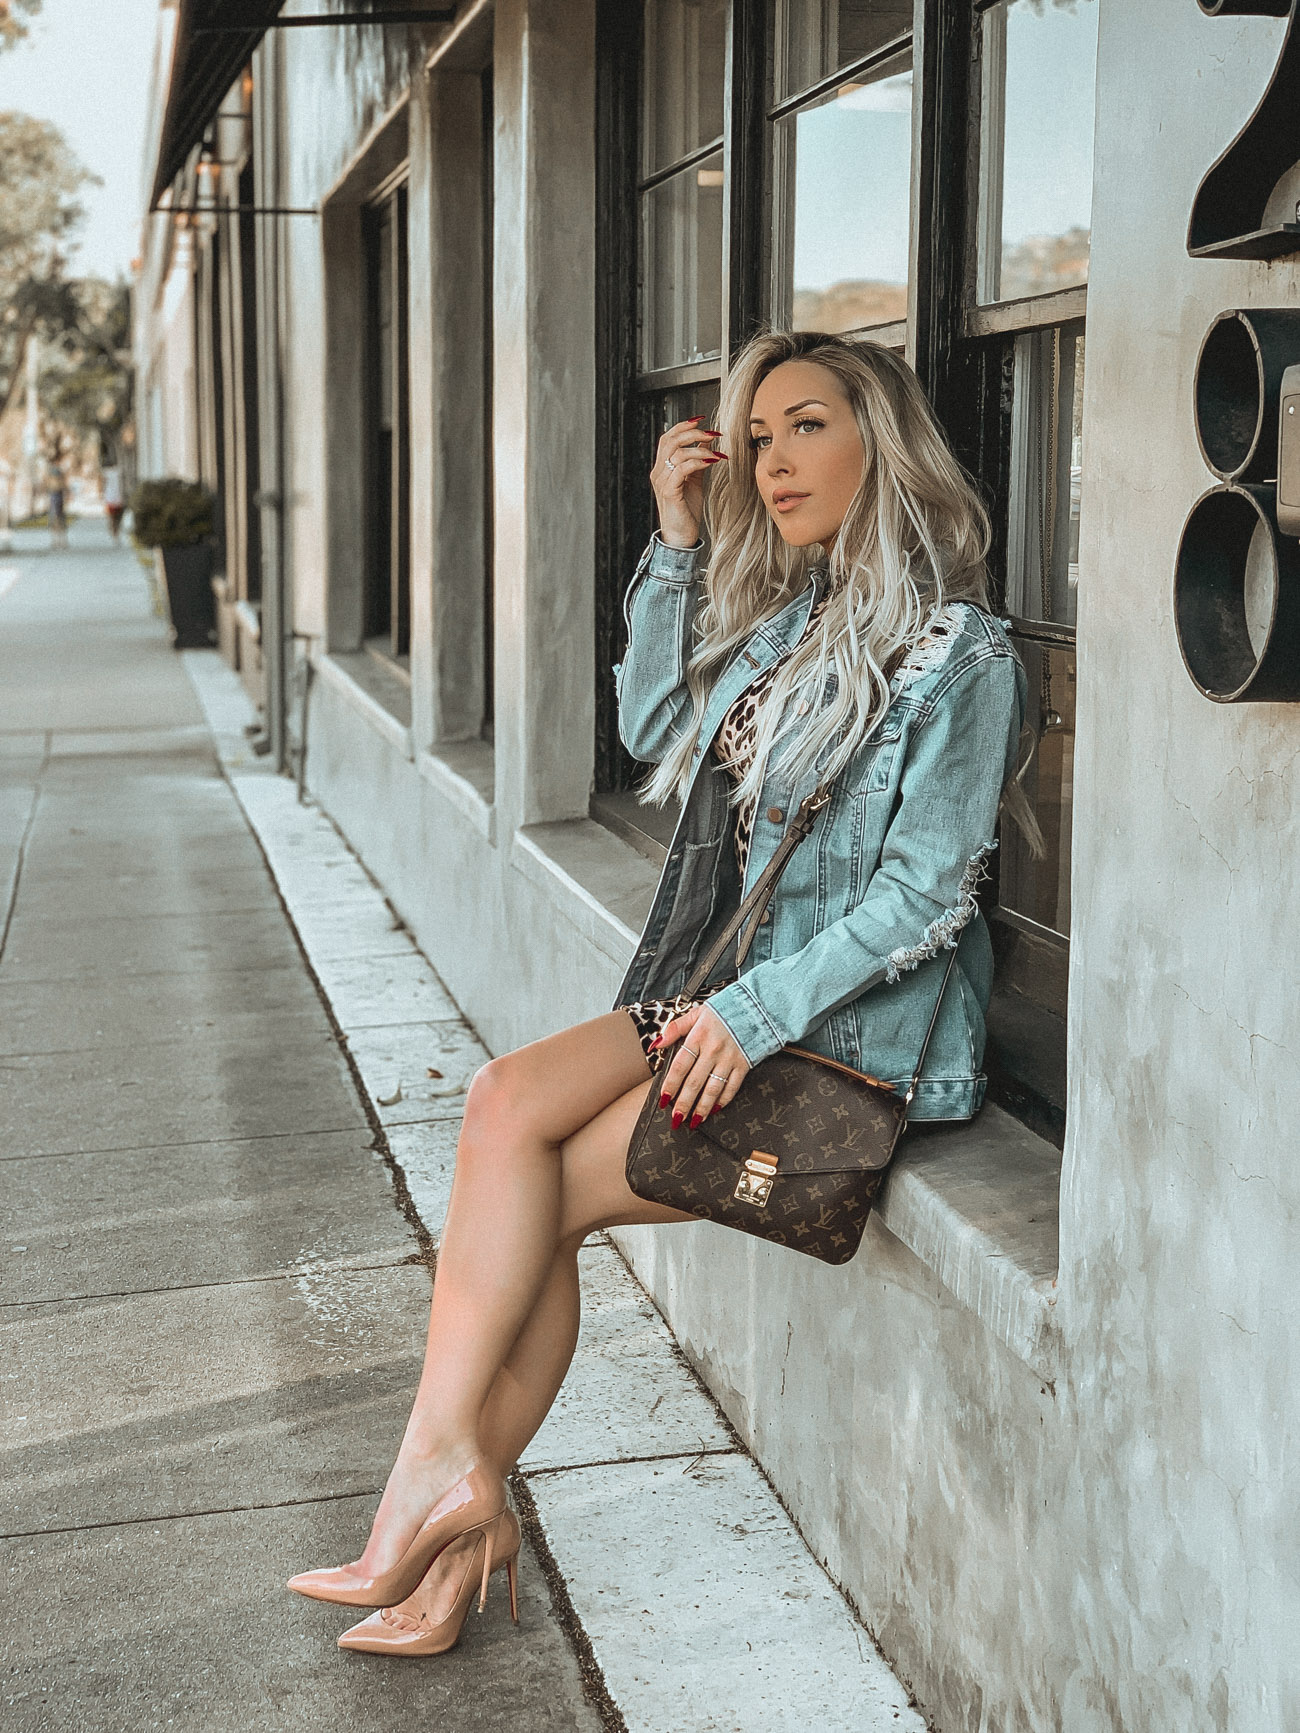 Mobile Presets for Lightroom | Instagram Filters | Instagram Editing | Hayley Larue Instagram | Instagram Aesthetic | Blondie in the City